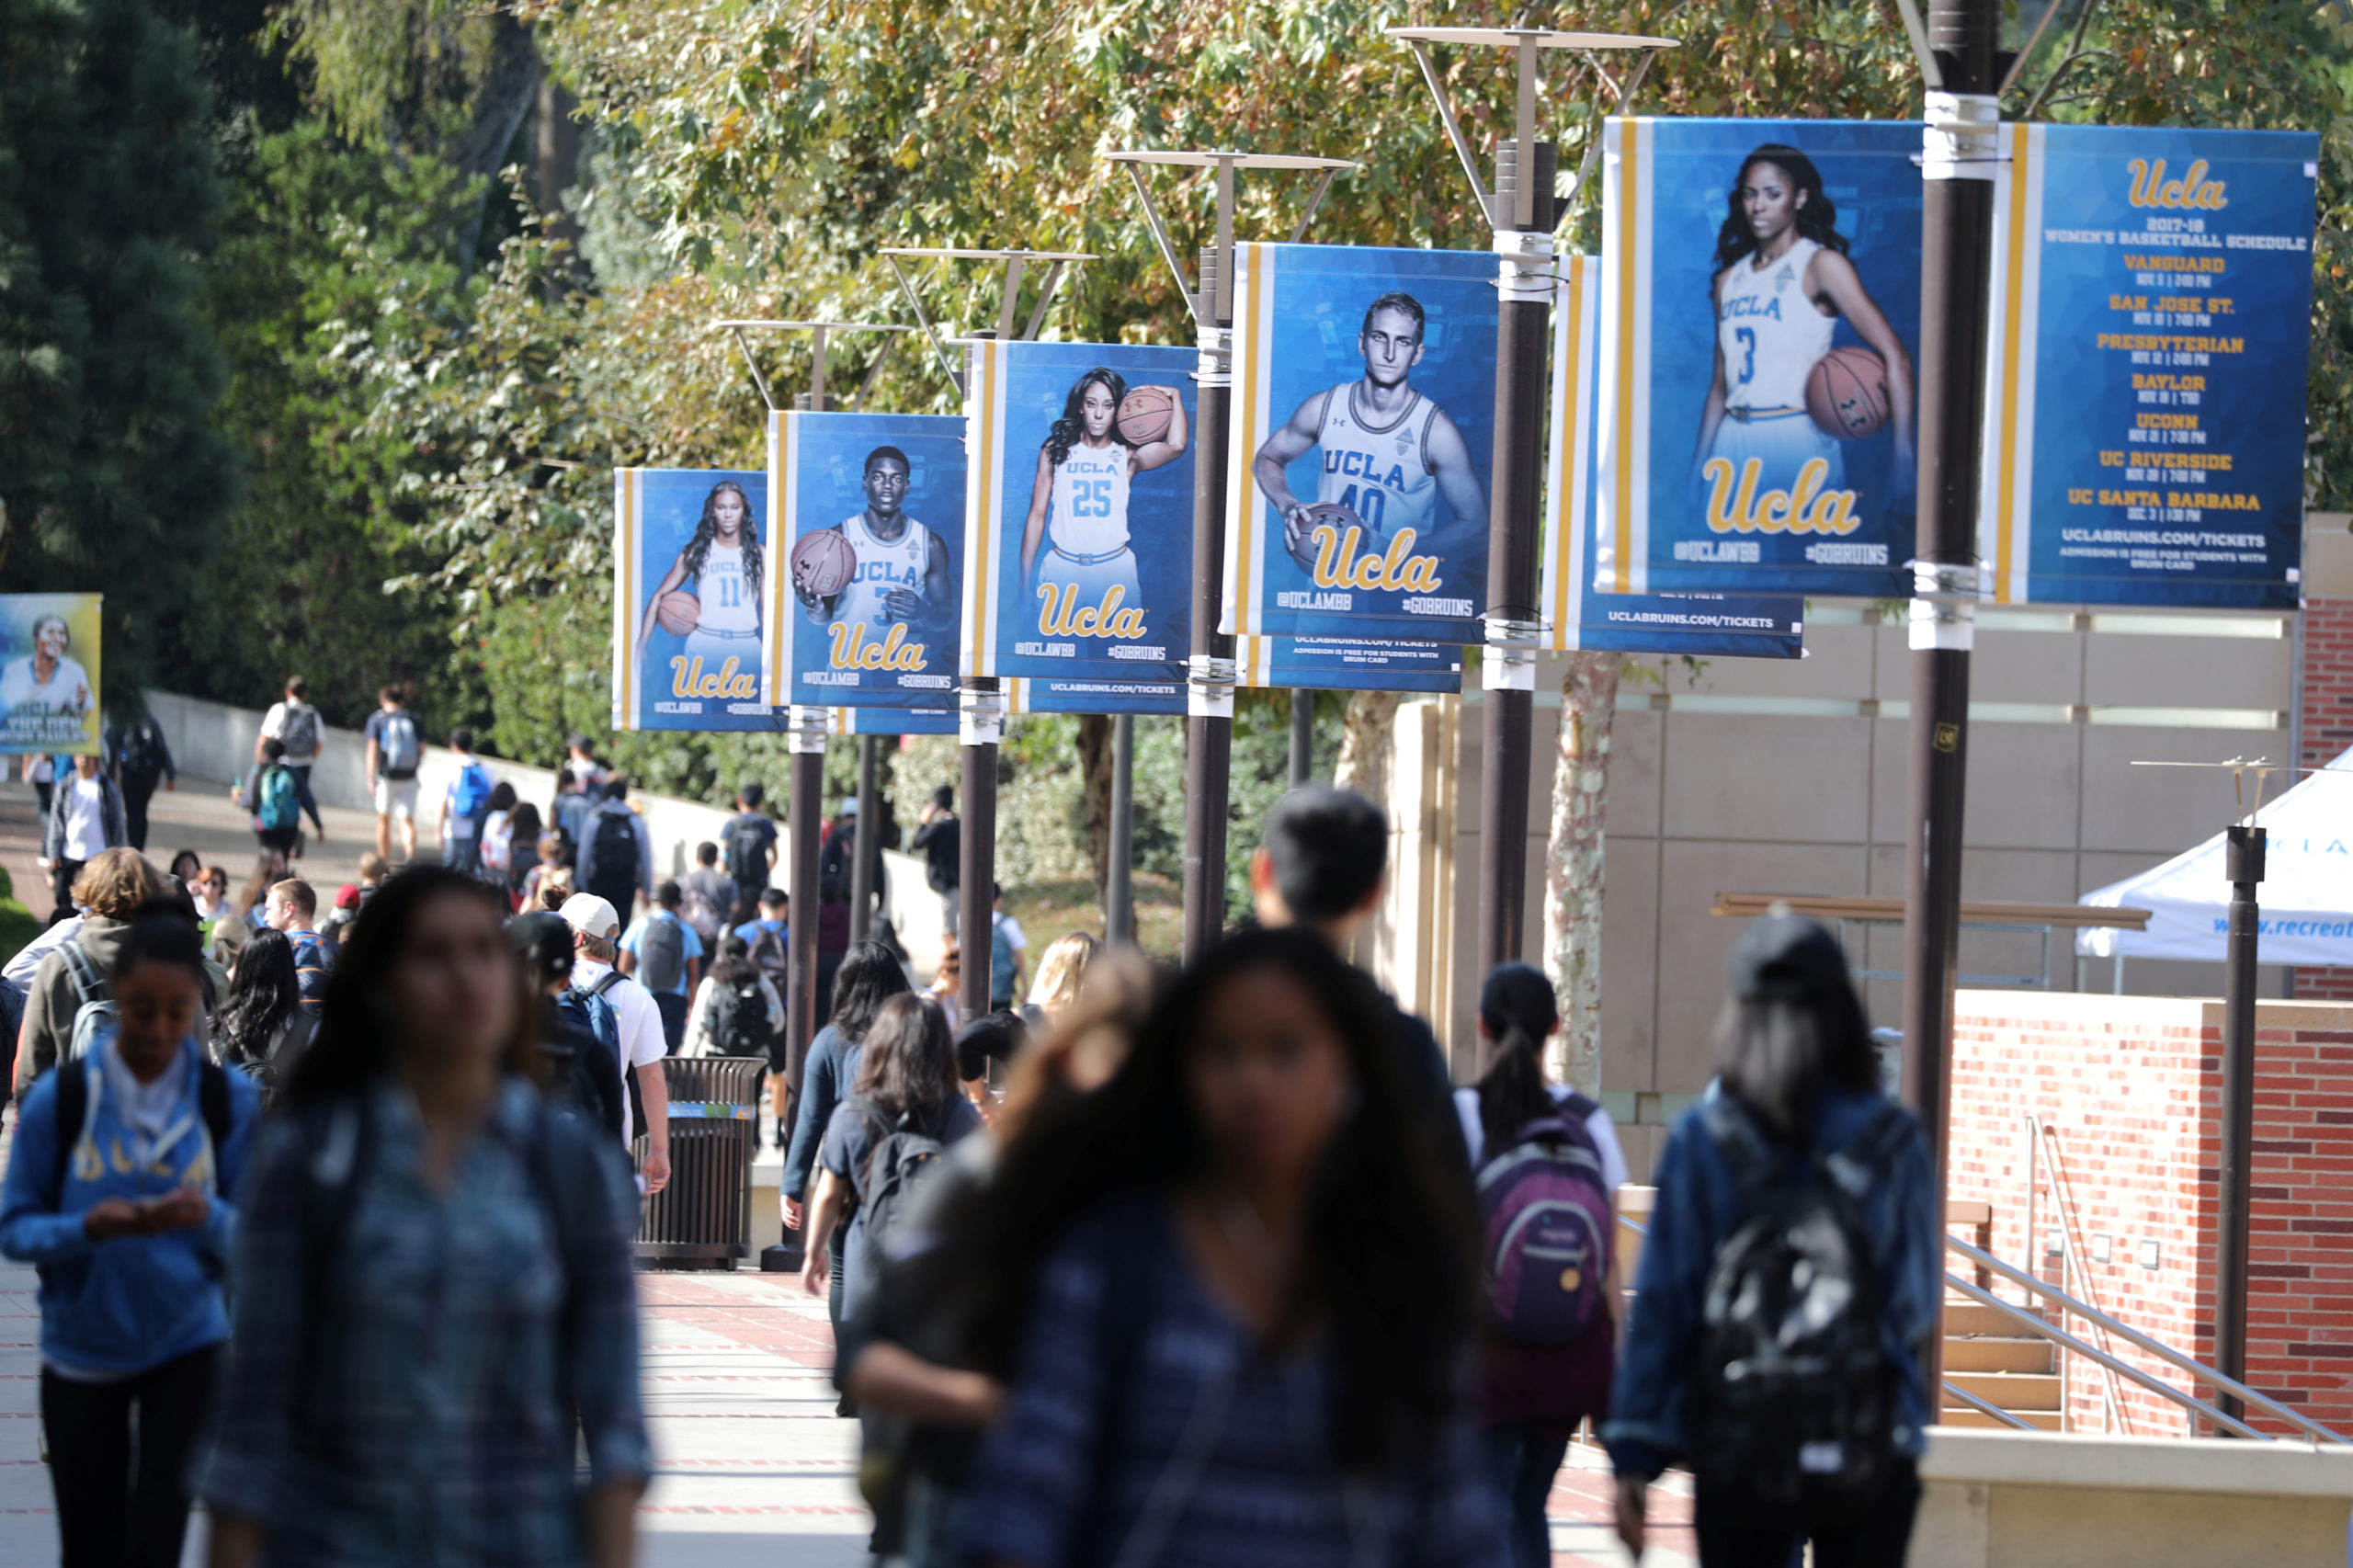 University of California Los Angeles (UCLA) students walk on the UCLA campus in Los Angeles, California, U.S. November 15, 2017. REUTERS/Lucy Nicholson